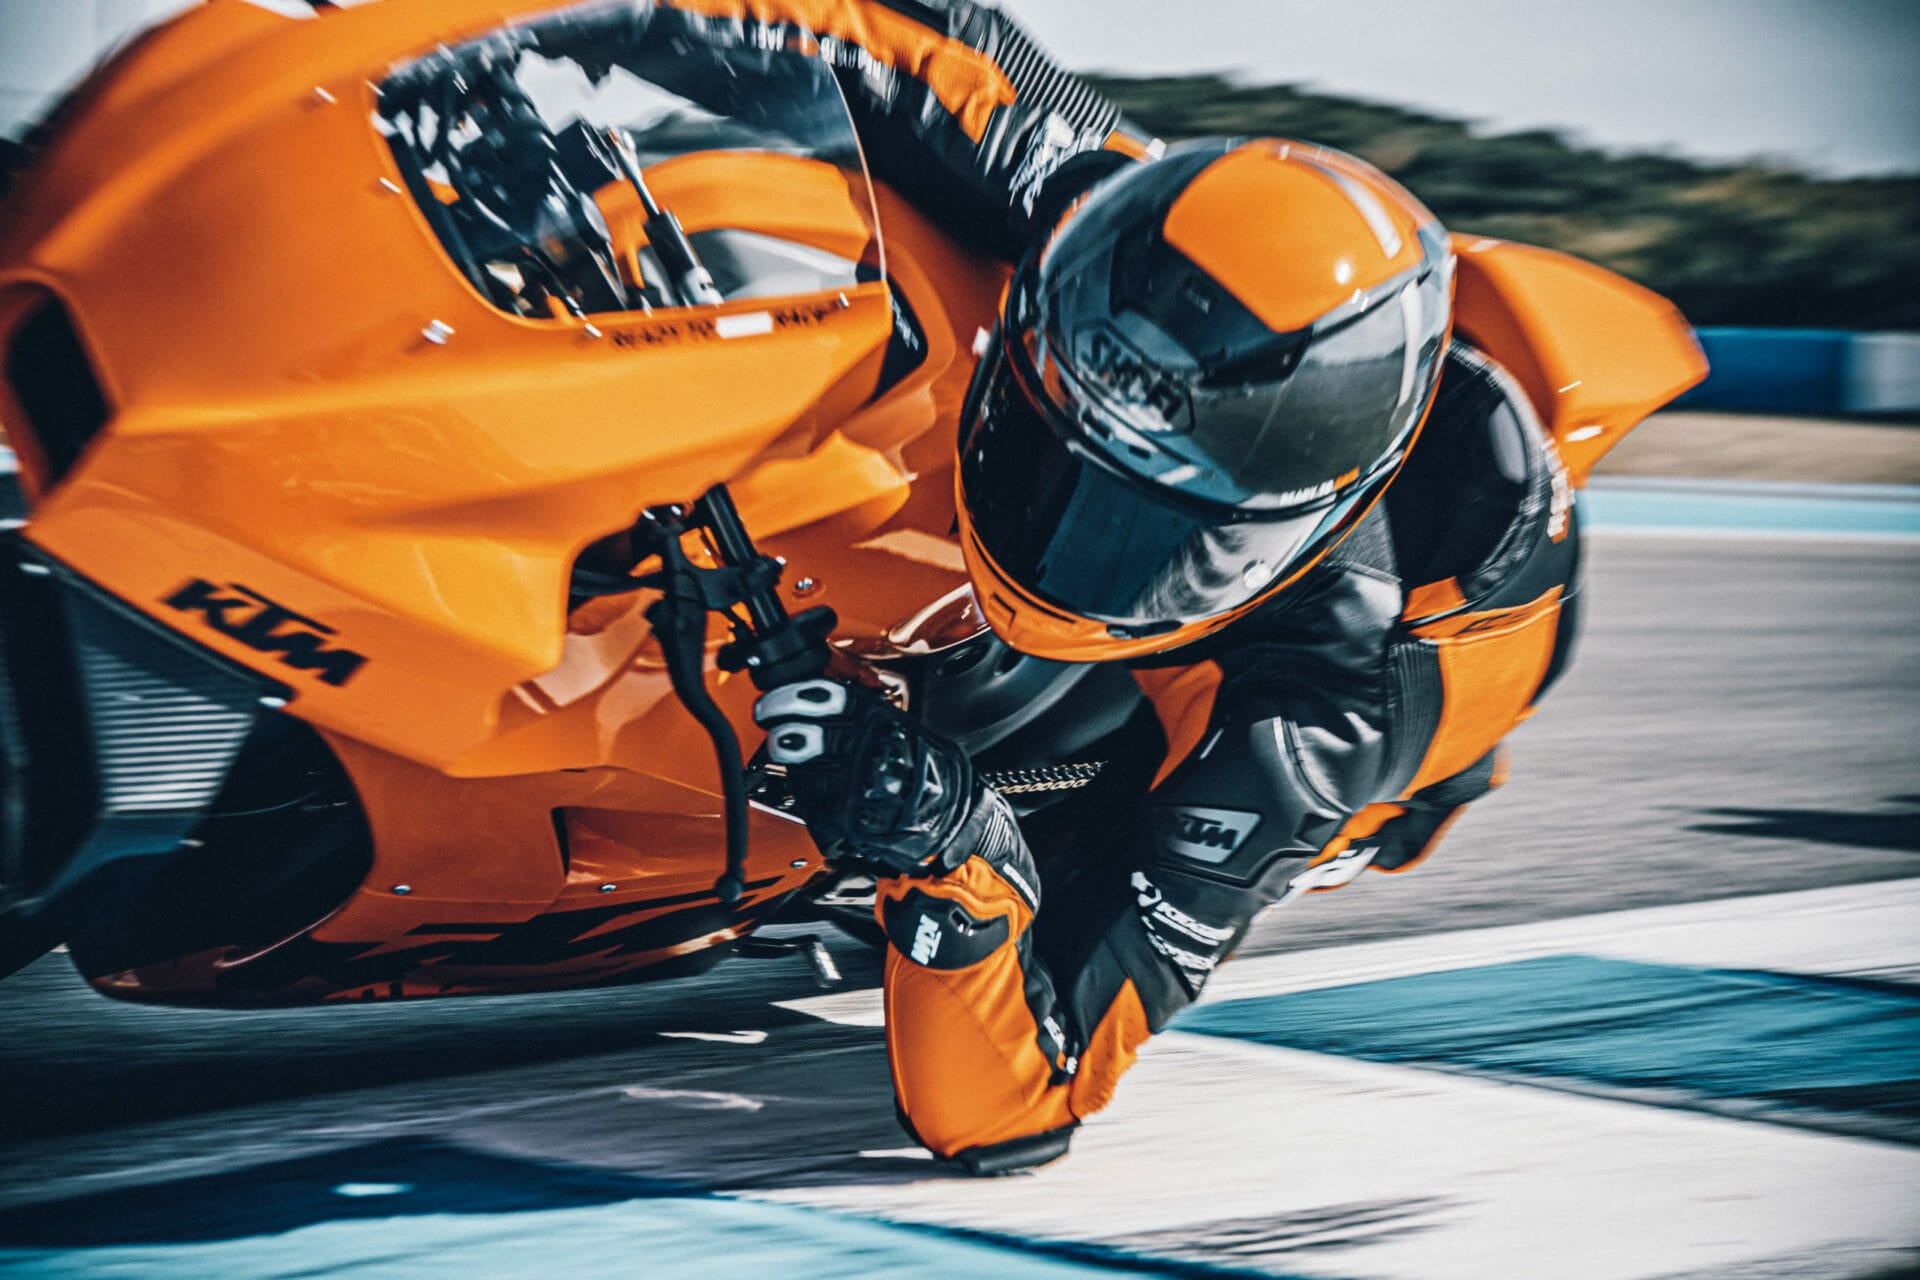 KTM RC 8C sold out after 5 minutes
- also in the MOTORCYCLES.NEWS APP